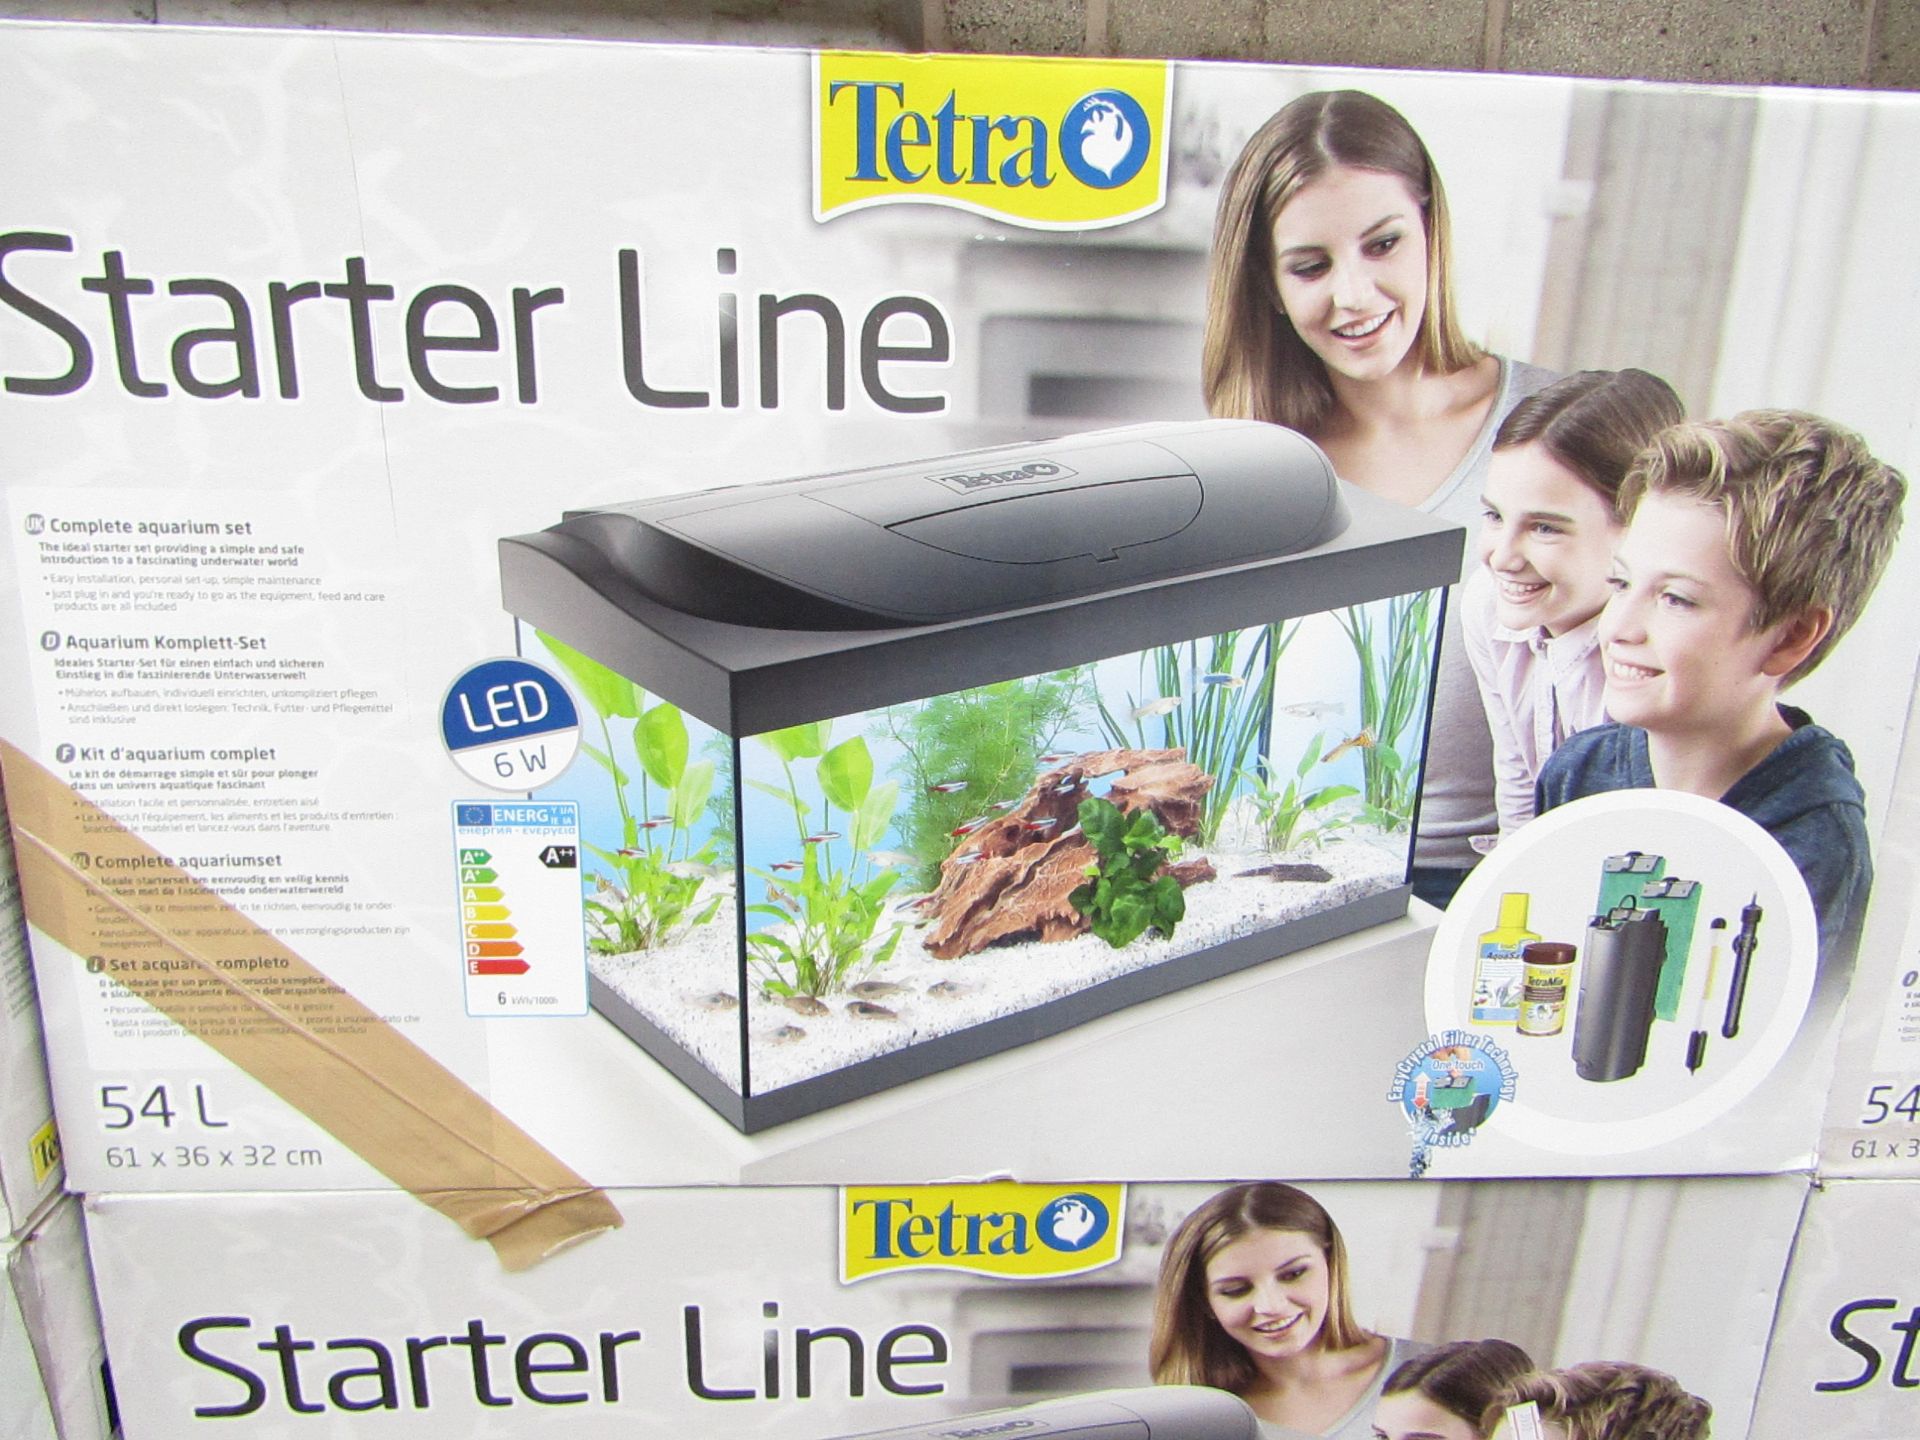 Tetra 54 L Starterline Aquarium Set comes boxed with accessories which may include a combination of